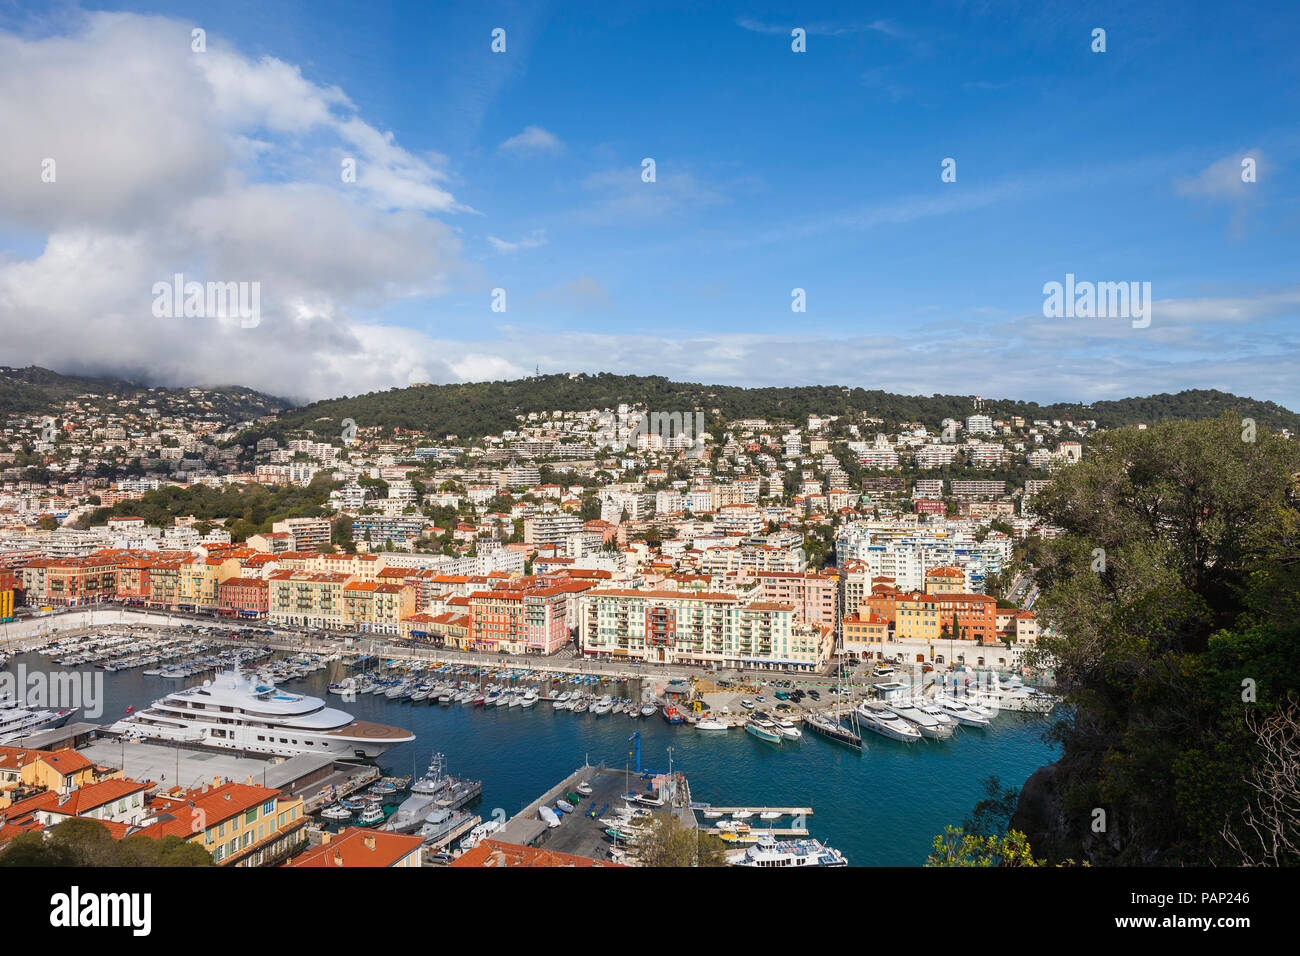 France, Provence-Alpes-Cote d'Azur, Nice, Cityscape and Port Lympia from above Stock Photo